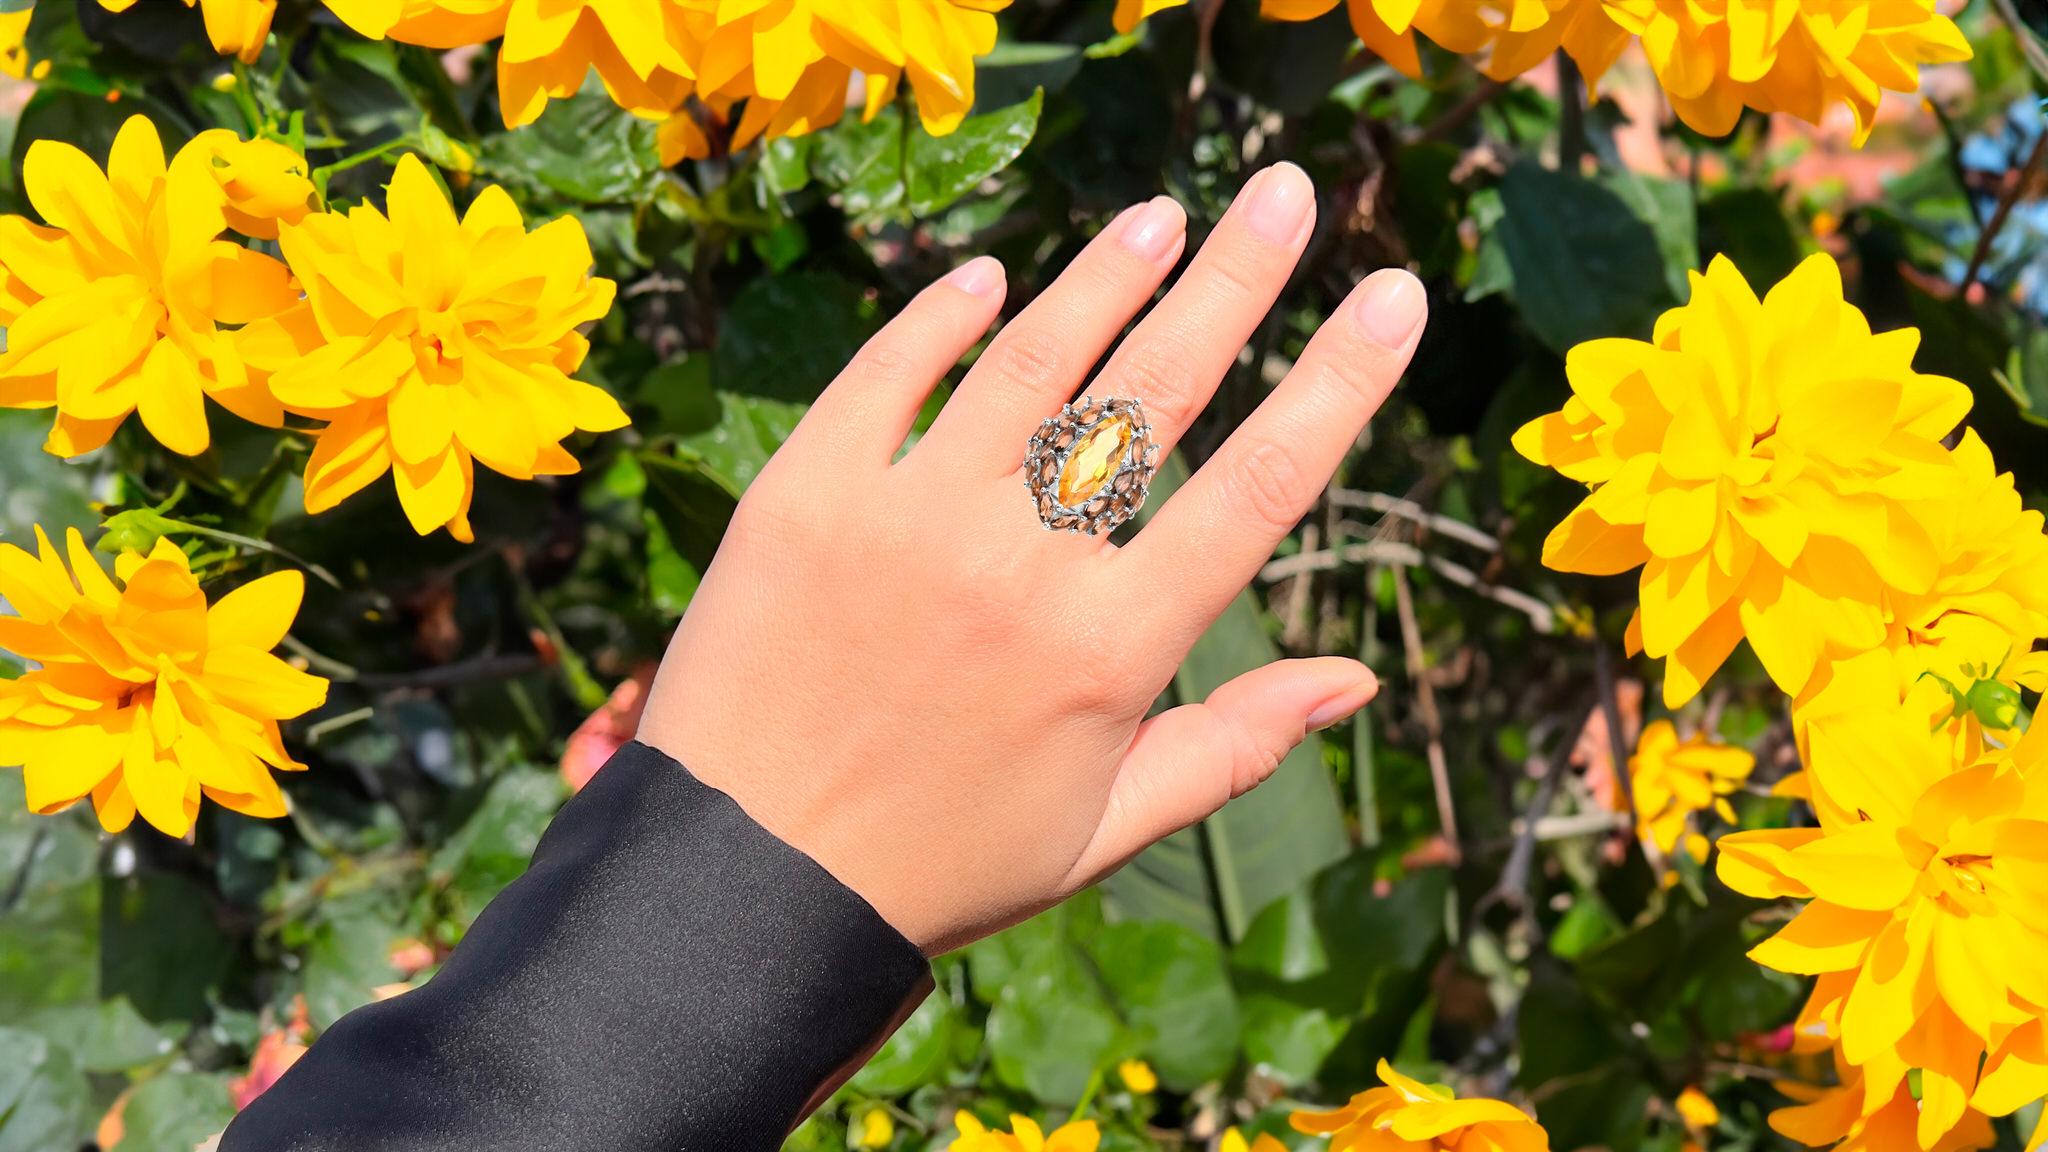 It comes with the Gemological Appraisal by GIA GG/AJP
Marquise Cut Citrine = 3.40 Carat
Marquise Cut Smoky Quartz = 2.80 Carats
Metal: Rhodium Plated Sterling Silver
Ring Size: 5* US
*It can be resized complimentary